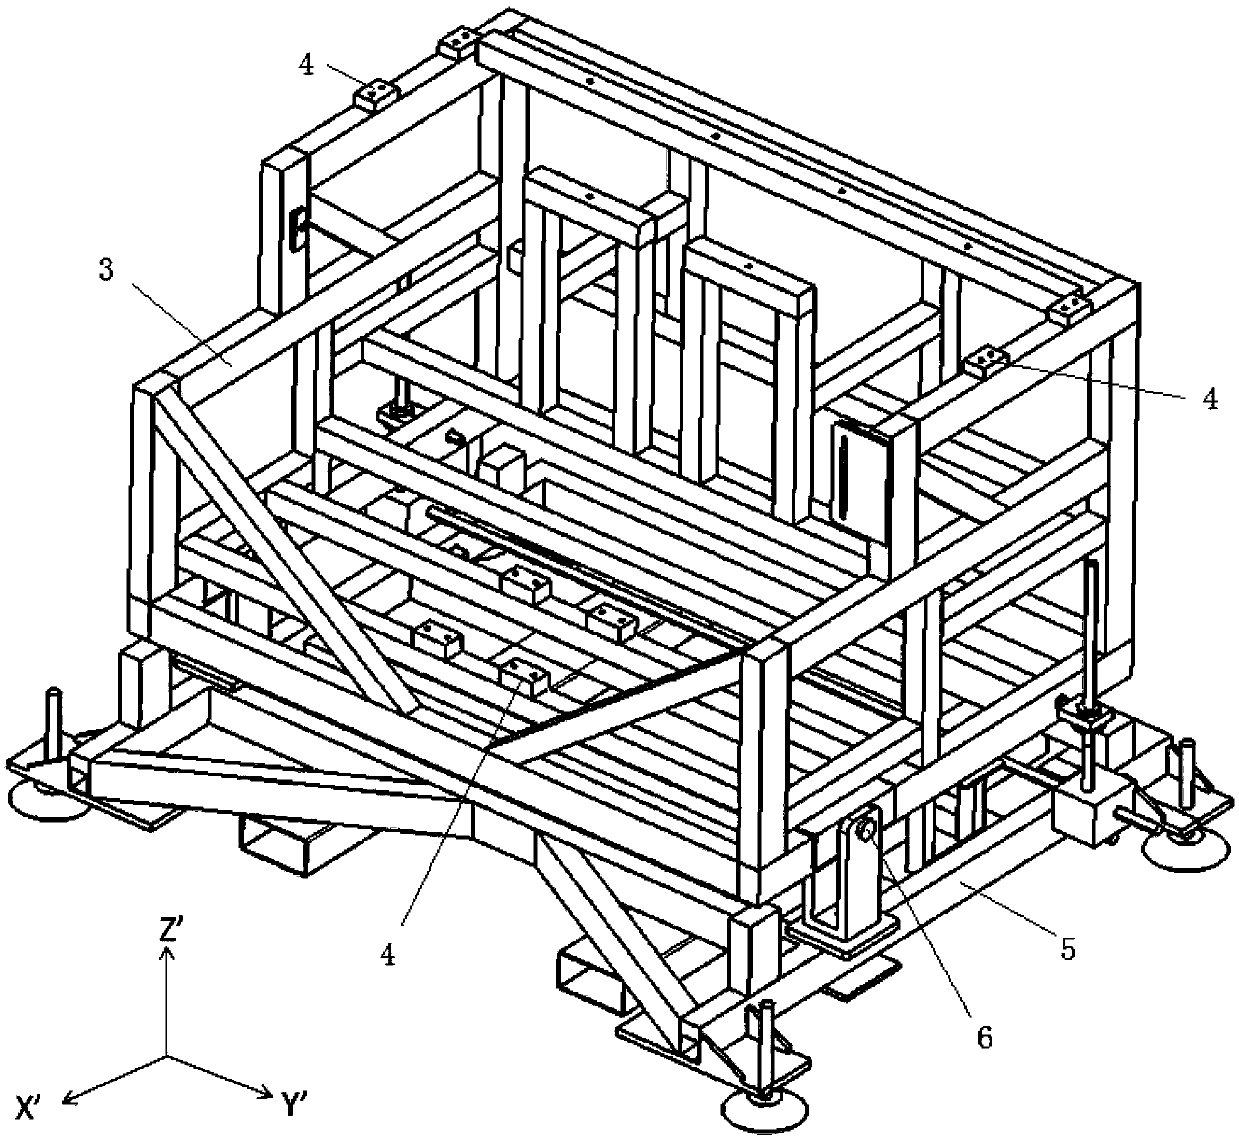 Verification device for automobile trunk assembly operation performance